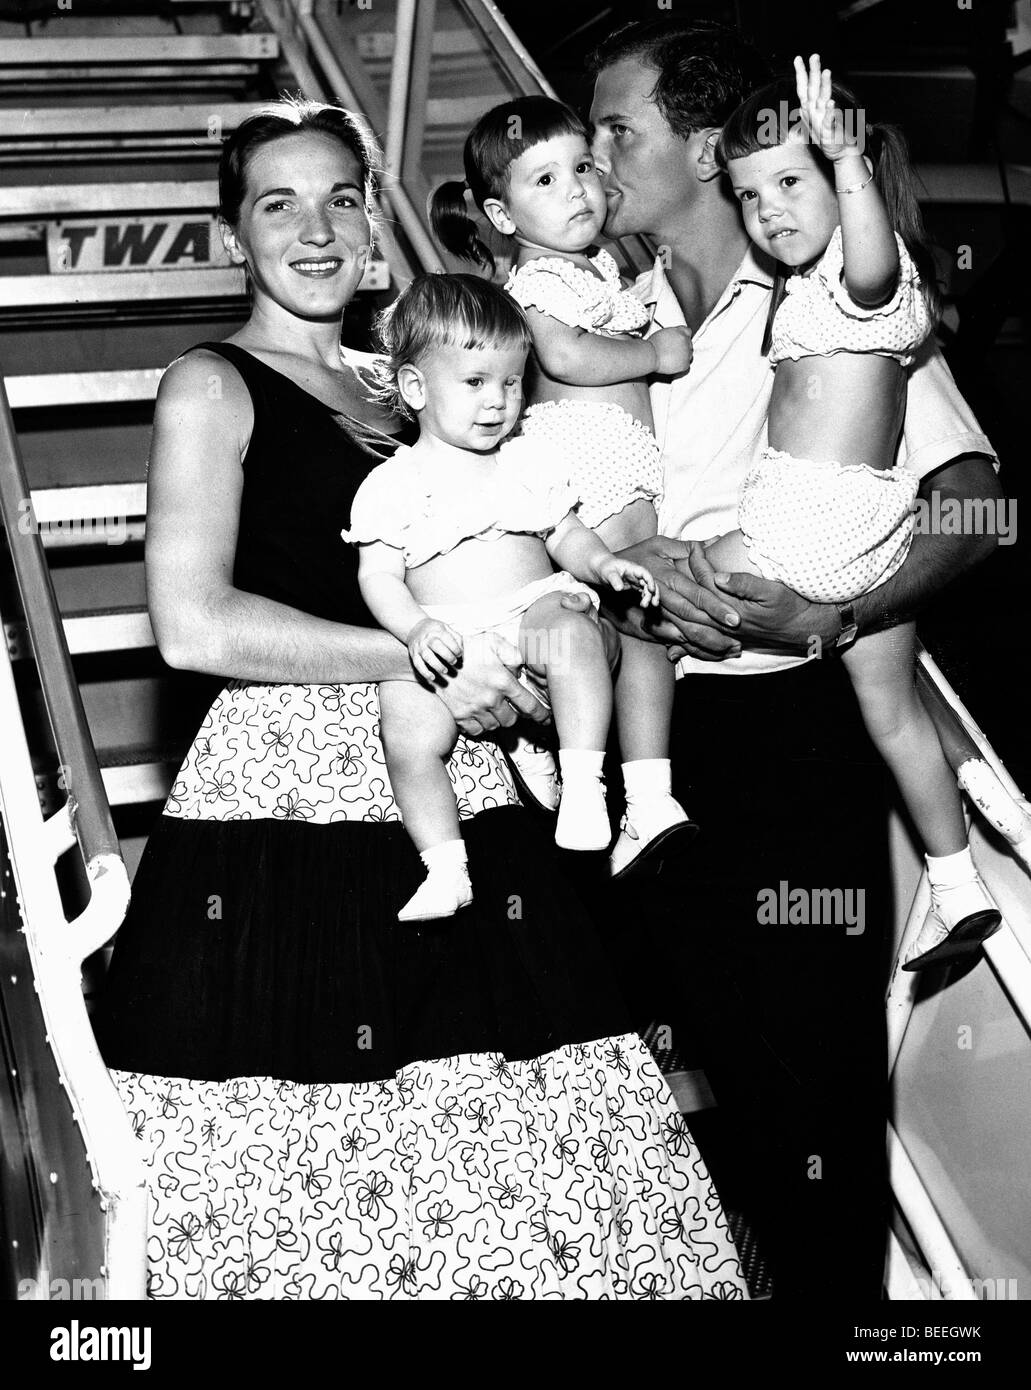 Singer PAT BOONE and wife Shirley Lee Foley, and three of their four daughters prepare to board a TWA flight in the late 1950's. Stock Photo